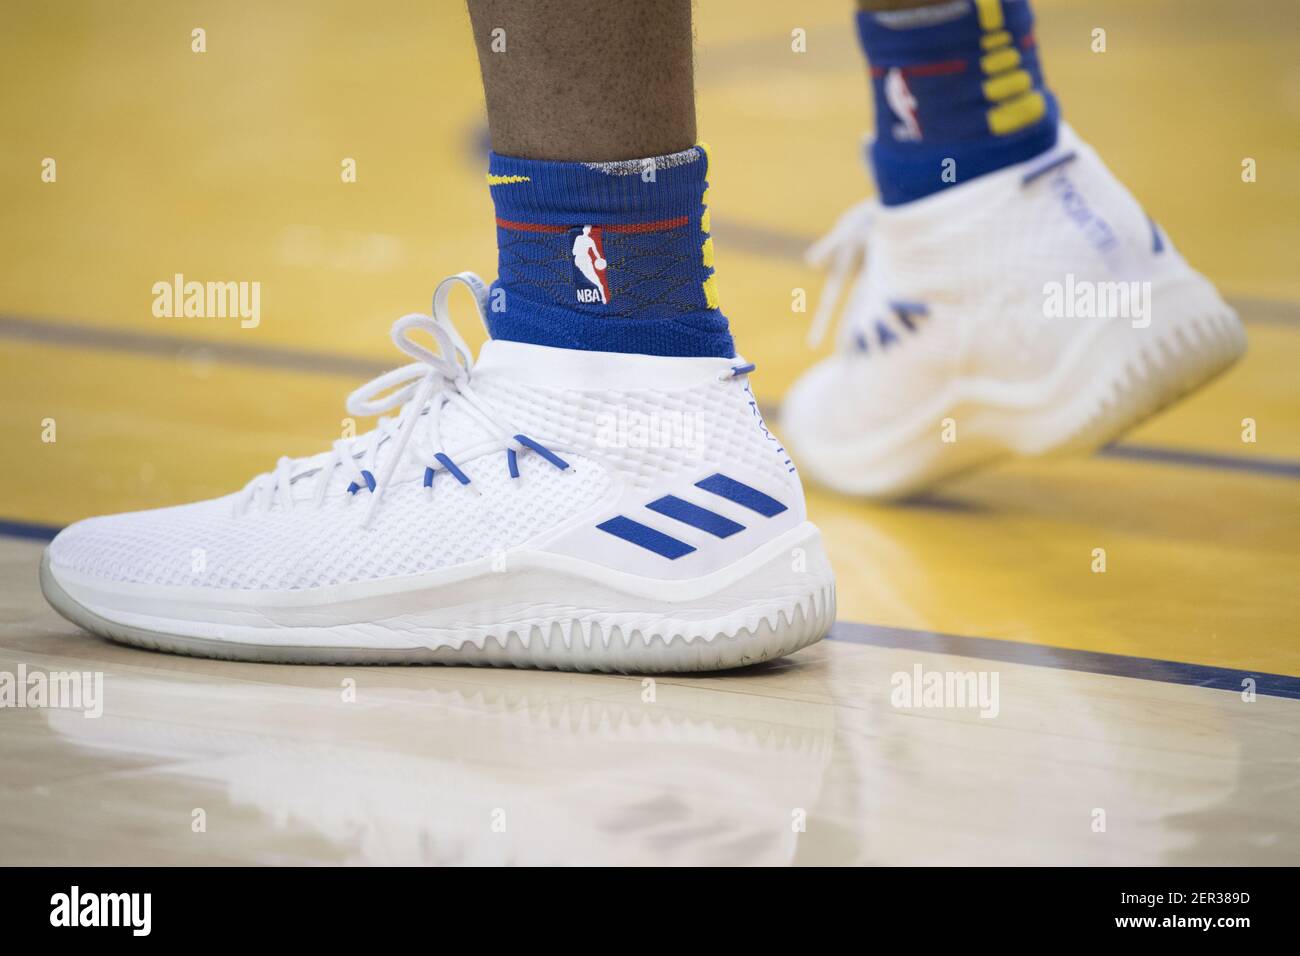 March 29, 2018; Oakland, CA, USA; Detail view of the Adidas shoes worn by  Golden State Warriors forward Kevon Looney (5) during the second quarter  against the Milwaukee Bucks at Oracle Arena.